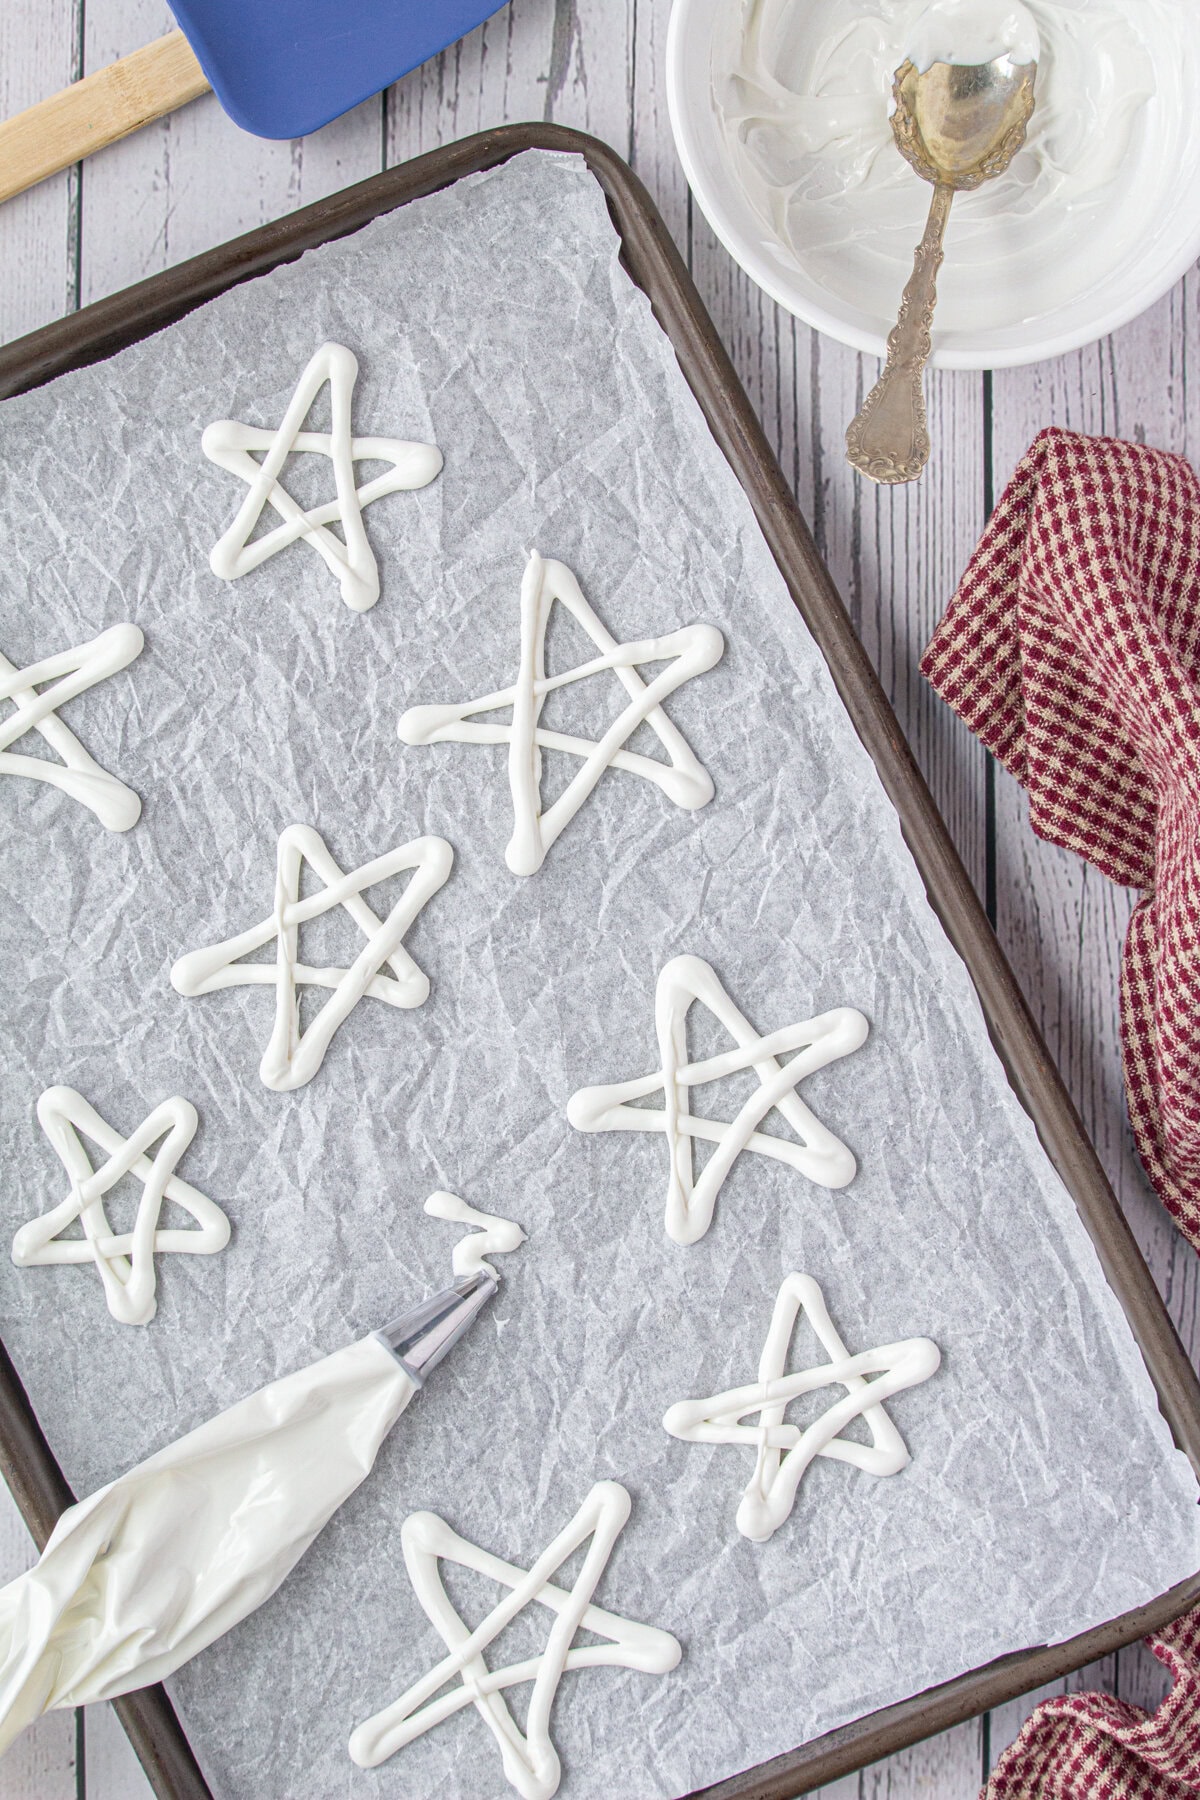 White chocolate stars being formed on a piece of parchment.